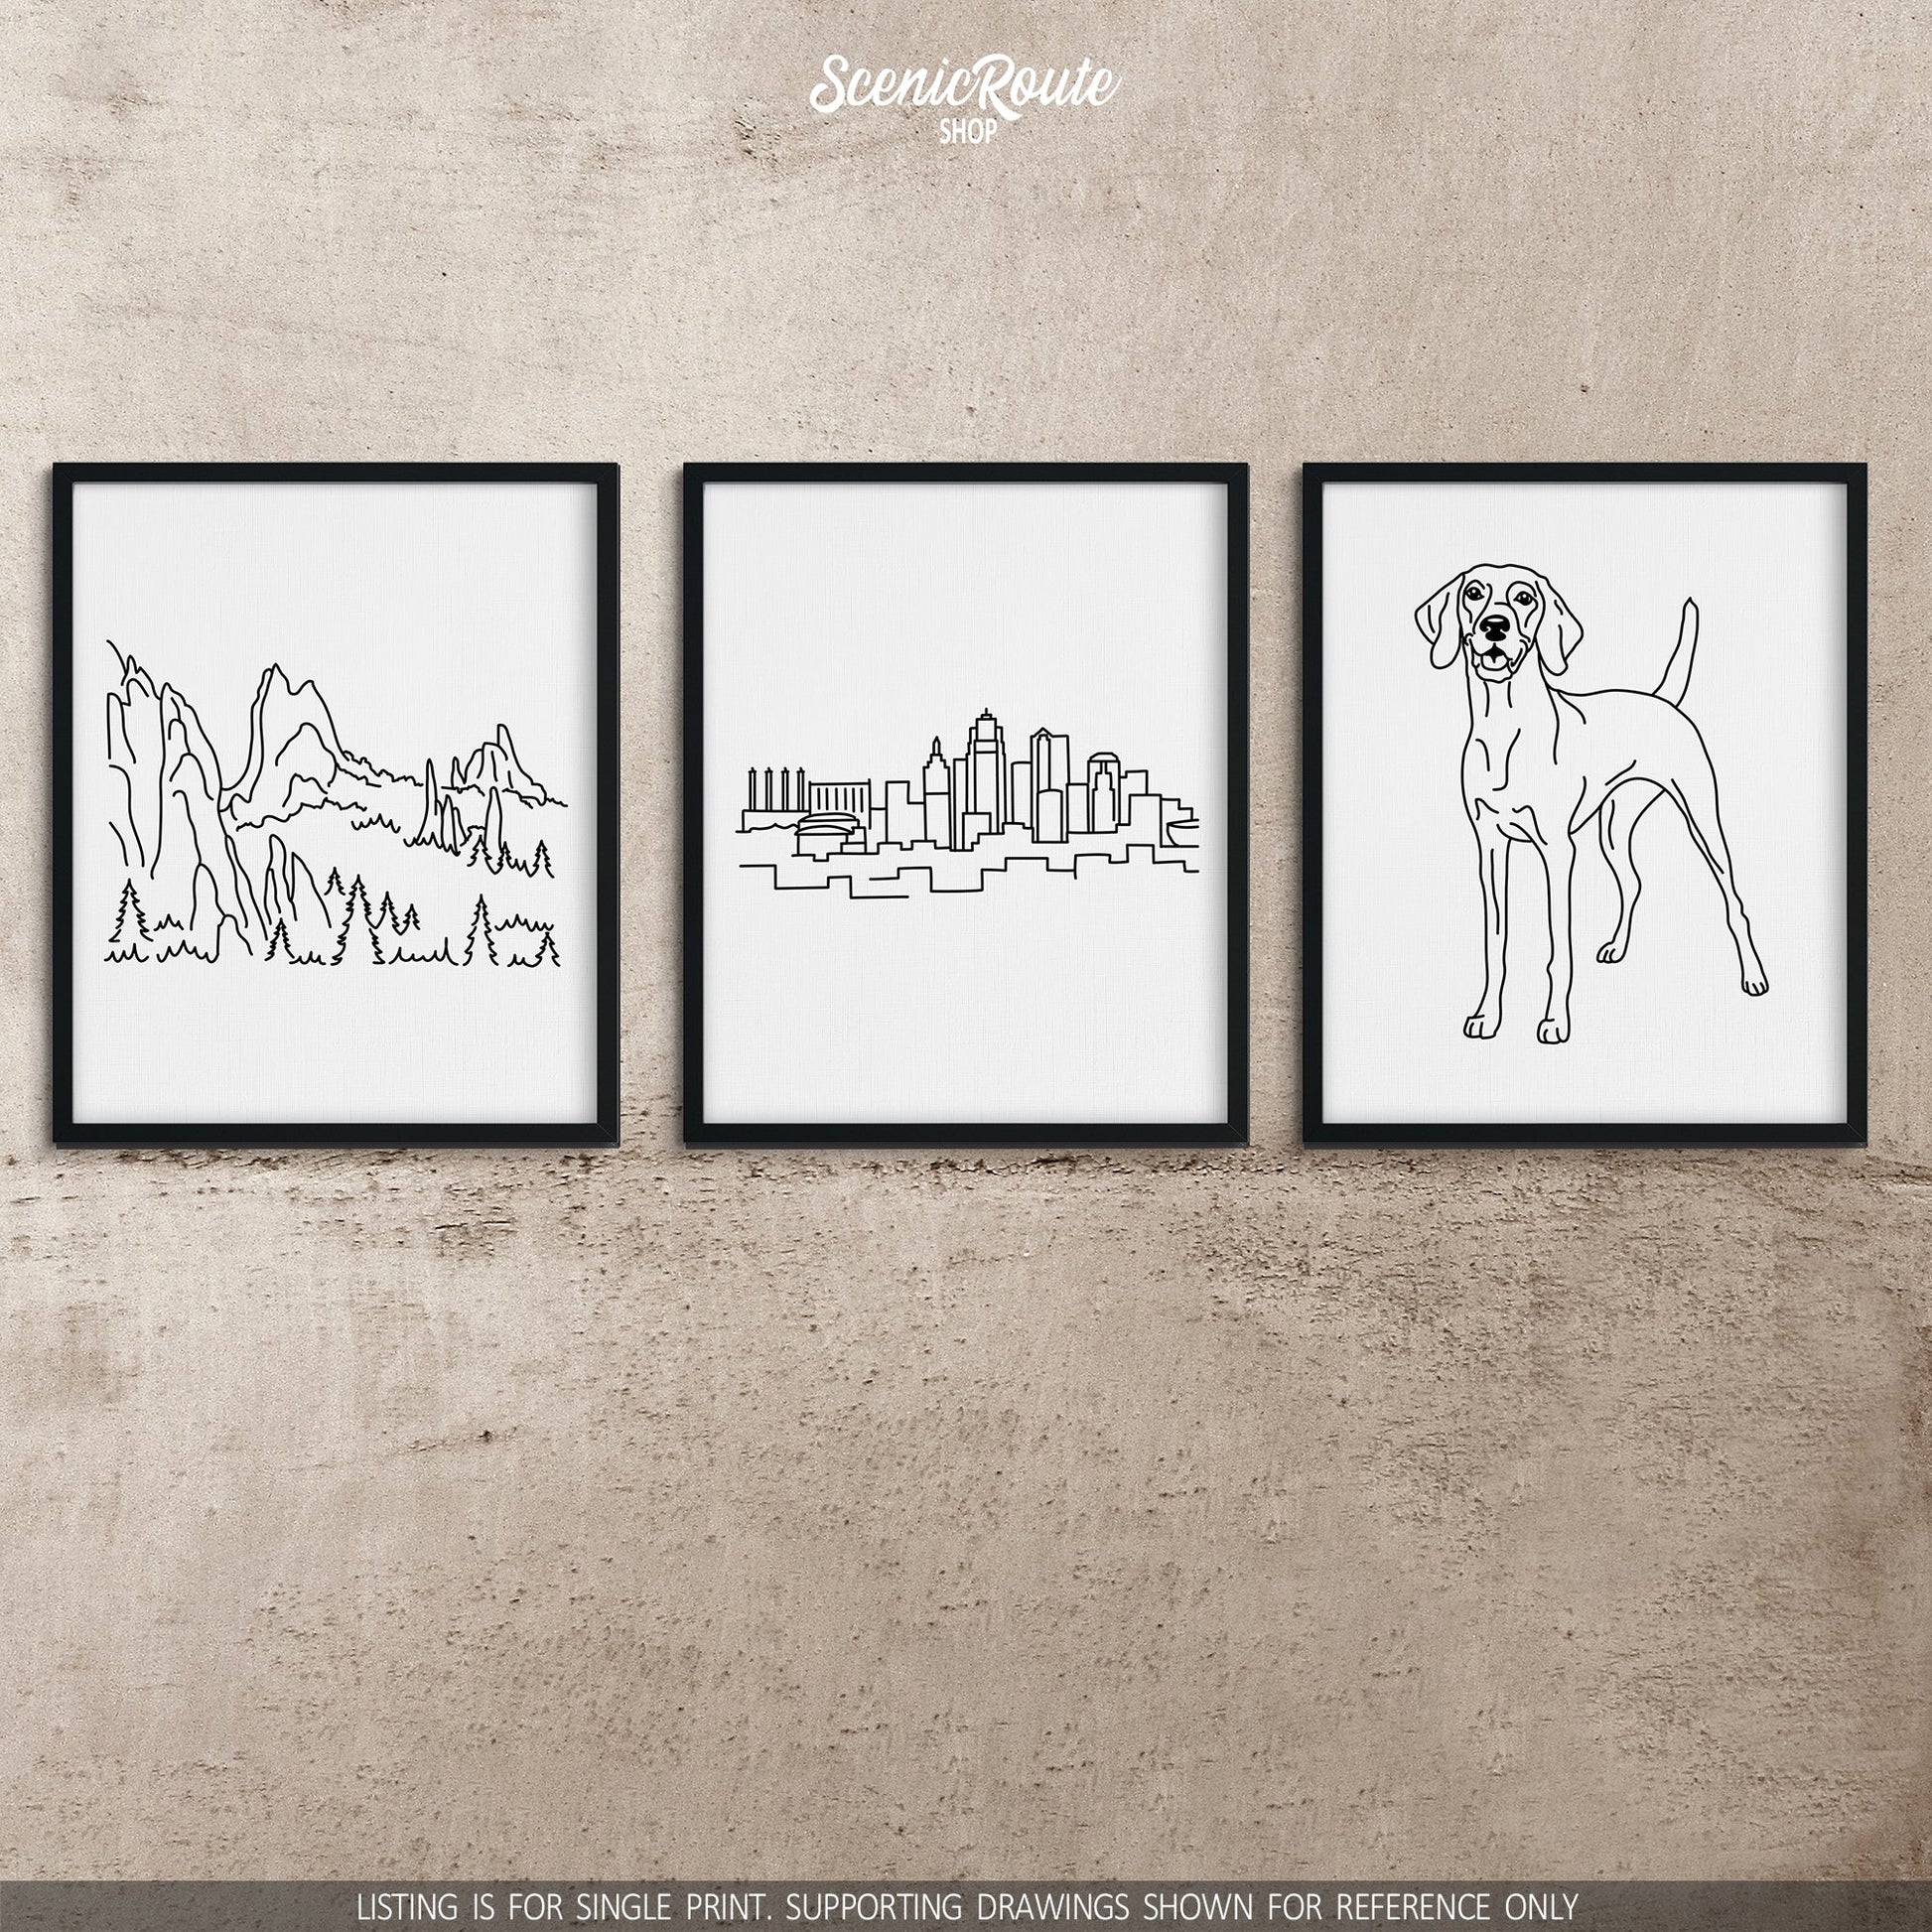 A group of three framed drawings on a concrete wall. The line art drawings include the Garden of the Gods, Kansas City Skyline, and Vizsla dog